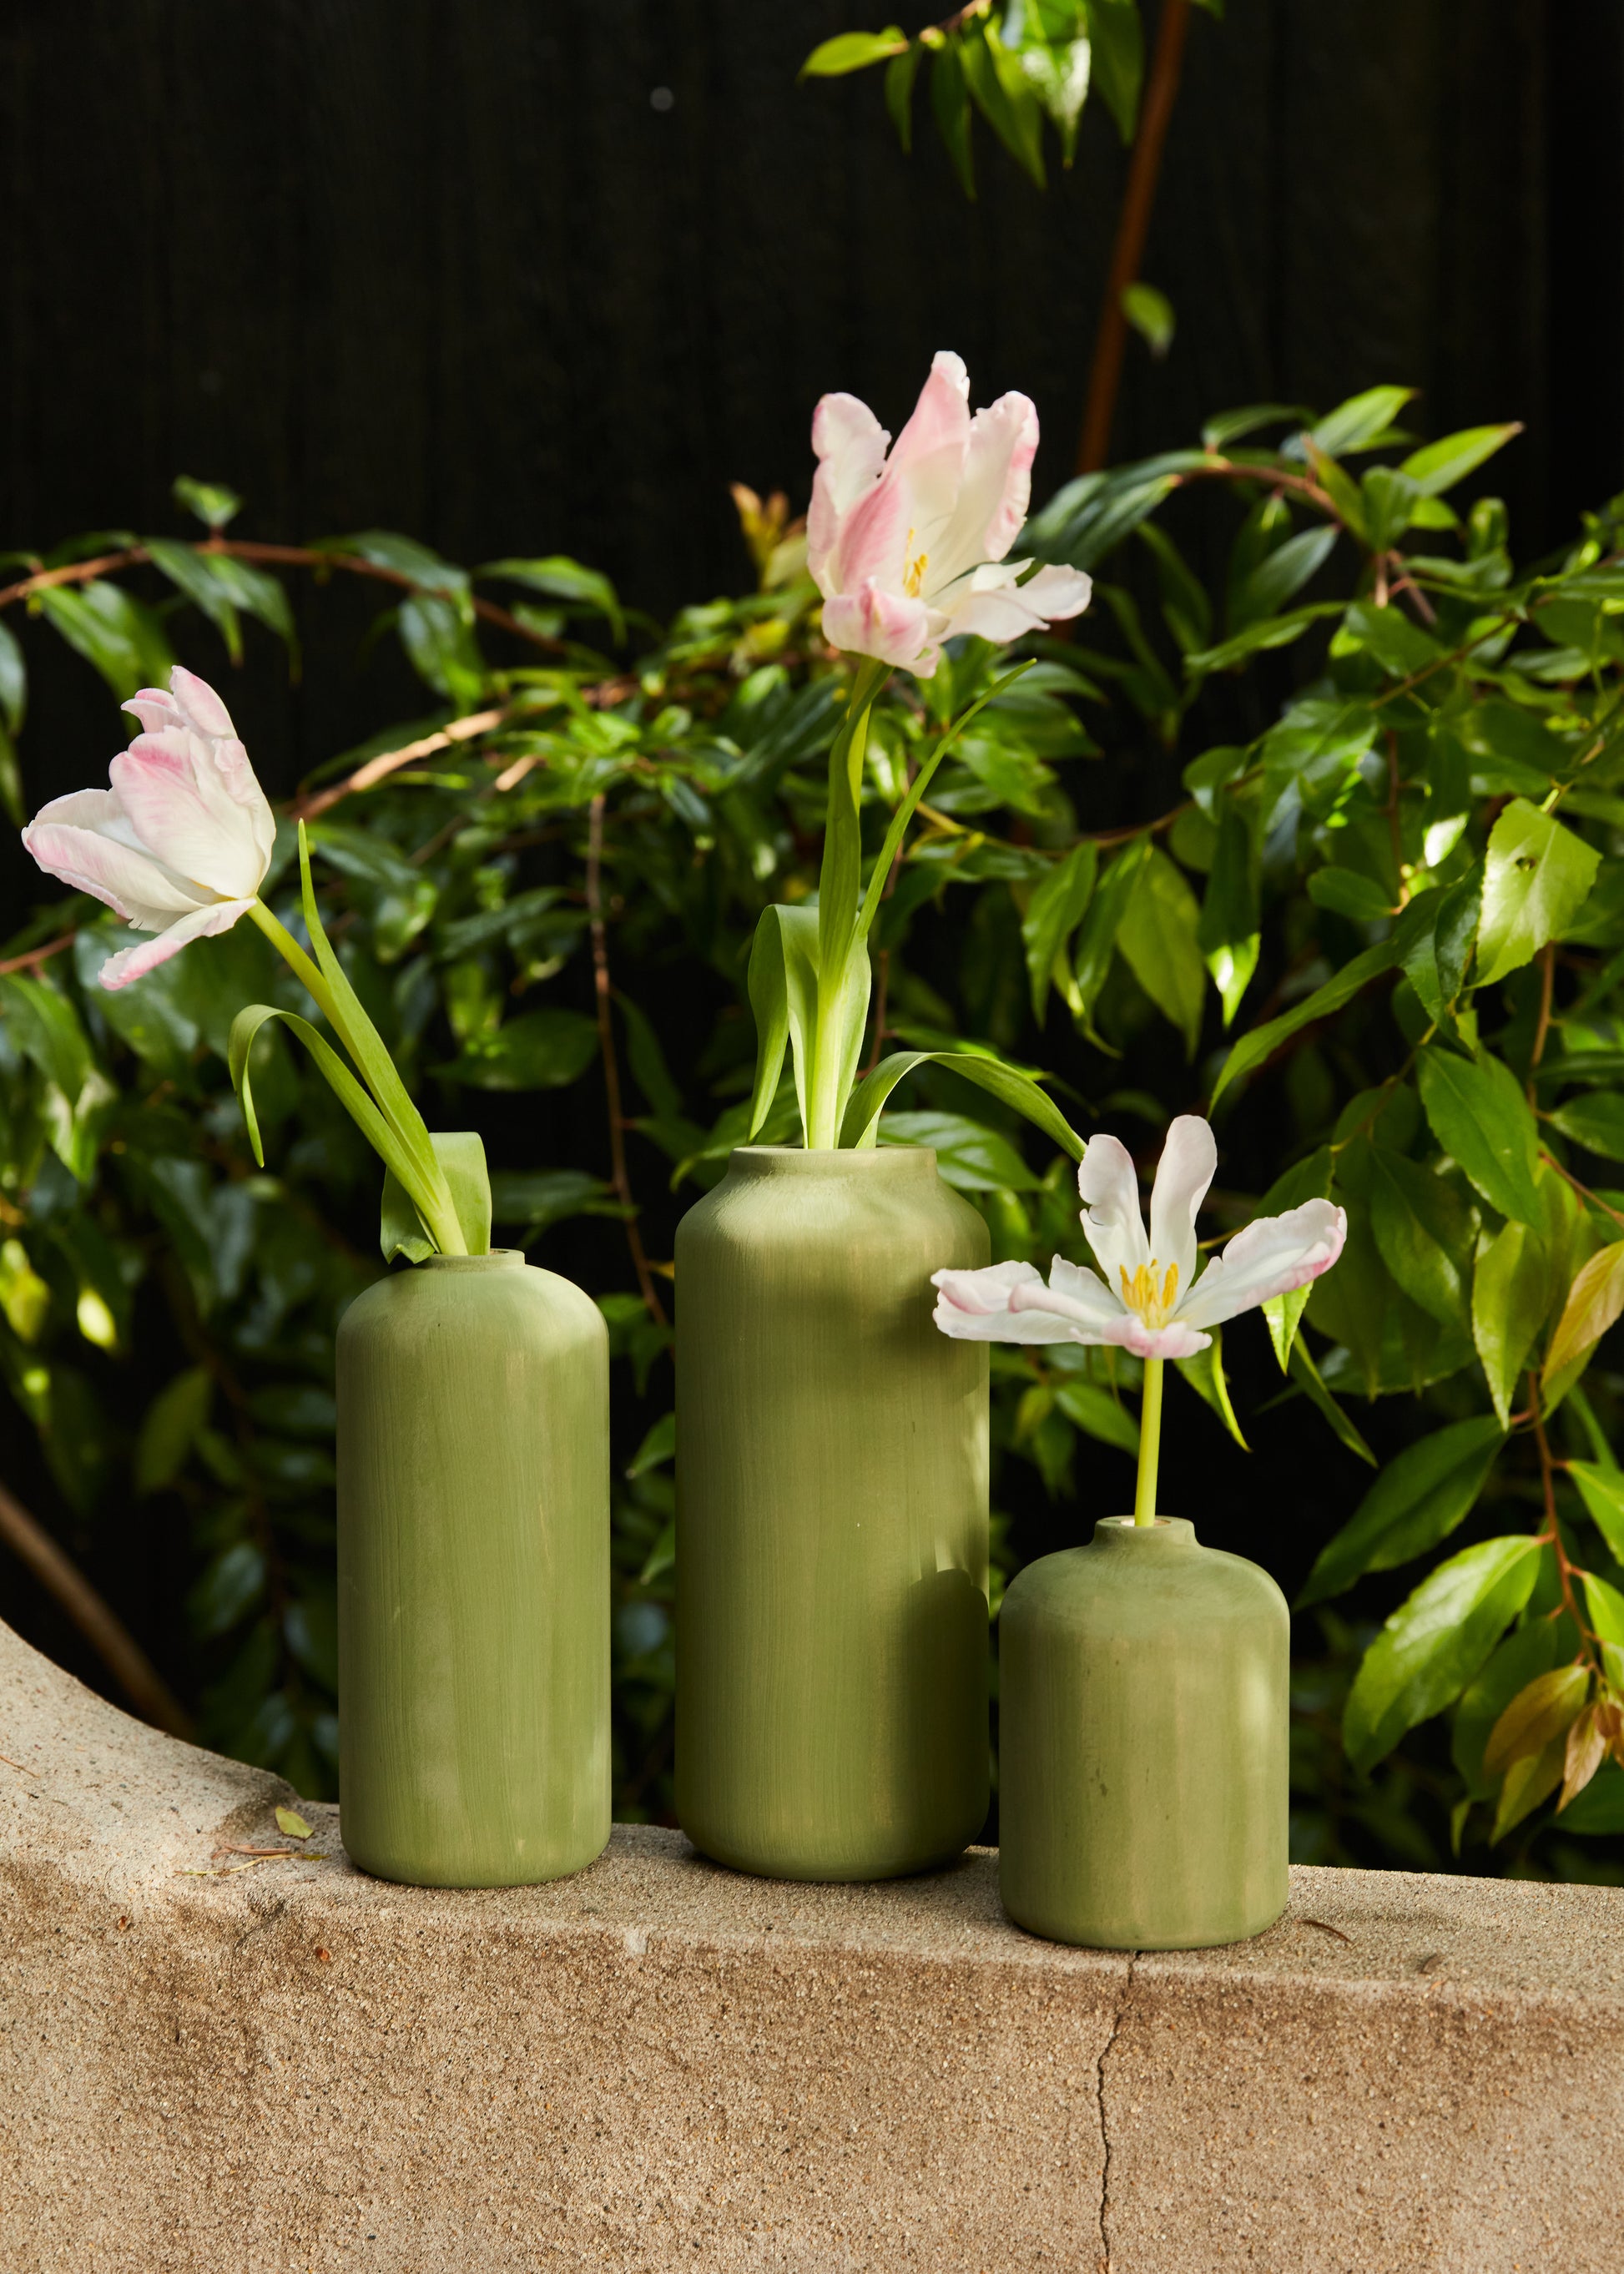 Josef Painted Vases Sage Green by Melanie Abrantes Designs. Vases on concrete wall with greenery in background.